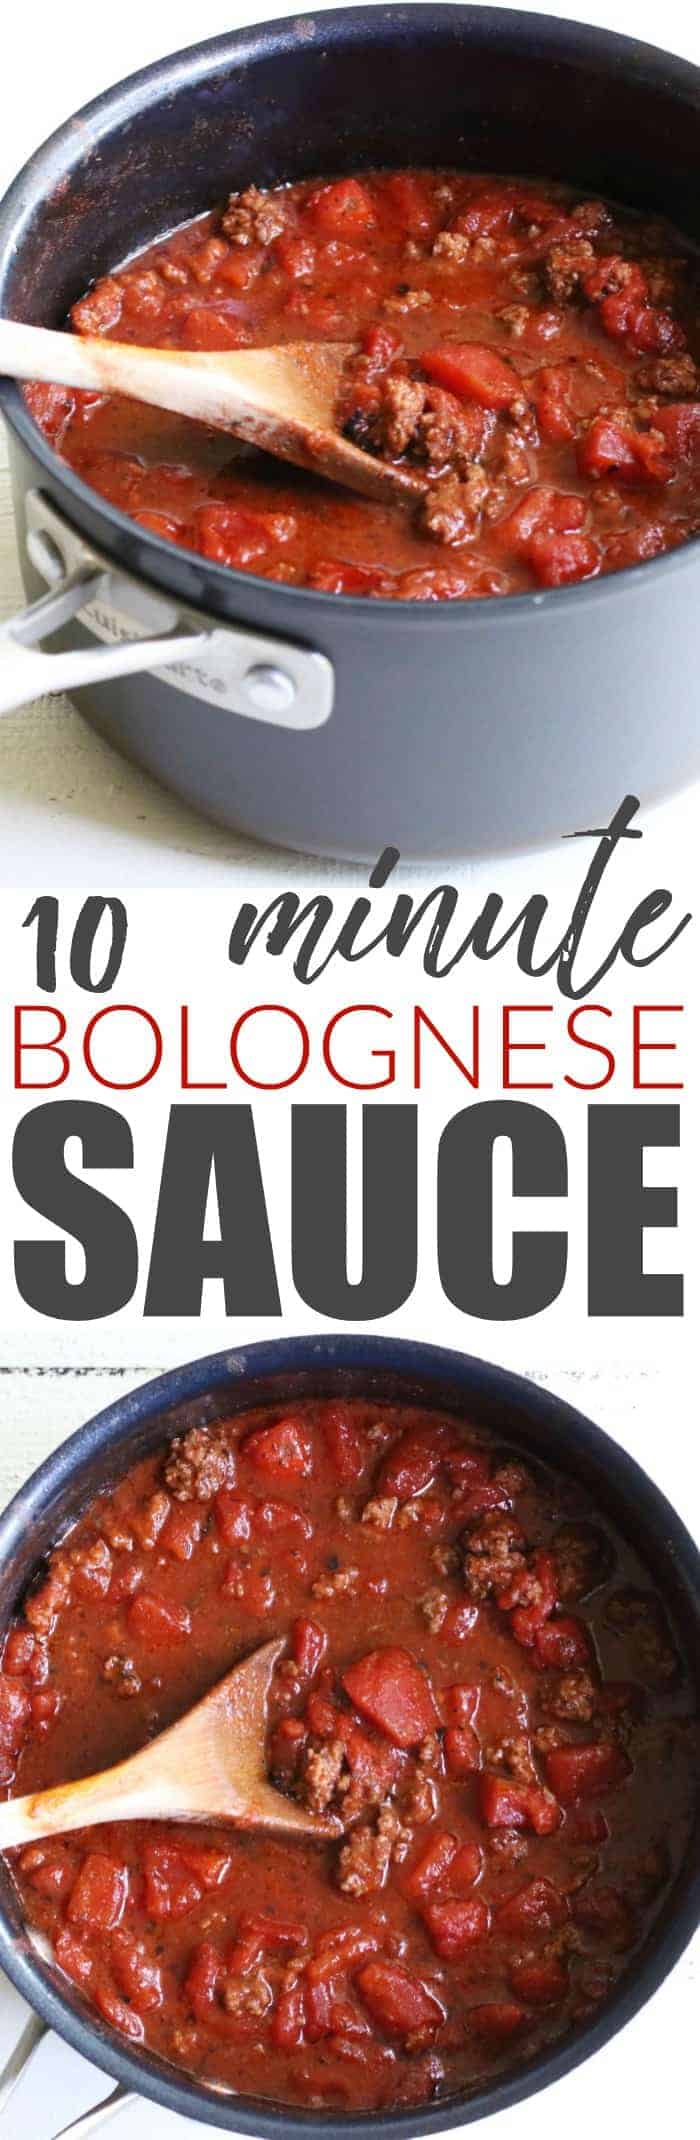 Delicious low carb + paleo chunky bolognese sauce that comes together in 10 minutes! Serve it on top of zoodles or spaghetti squash and enjoy!! thetoastedpinenut.com #meatsauce #bolognese #paleo